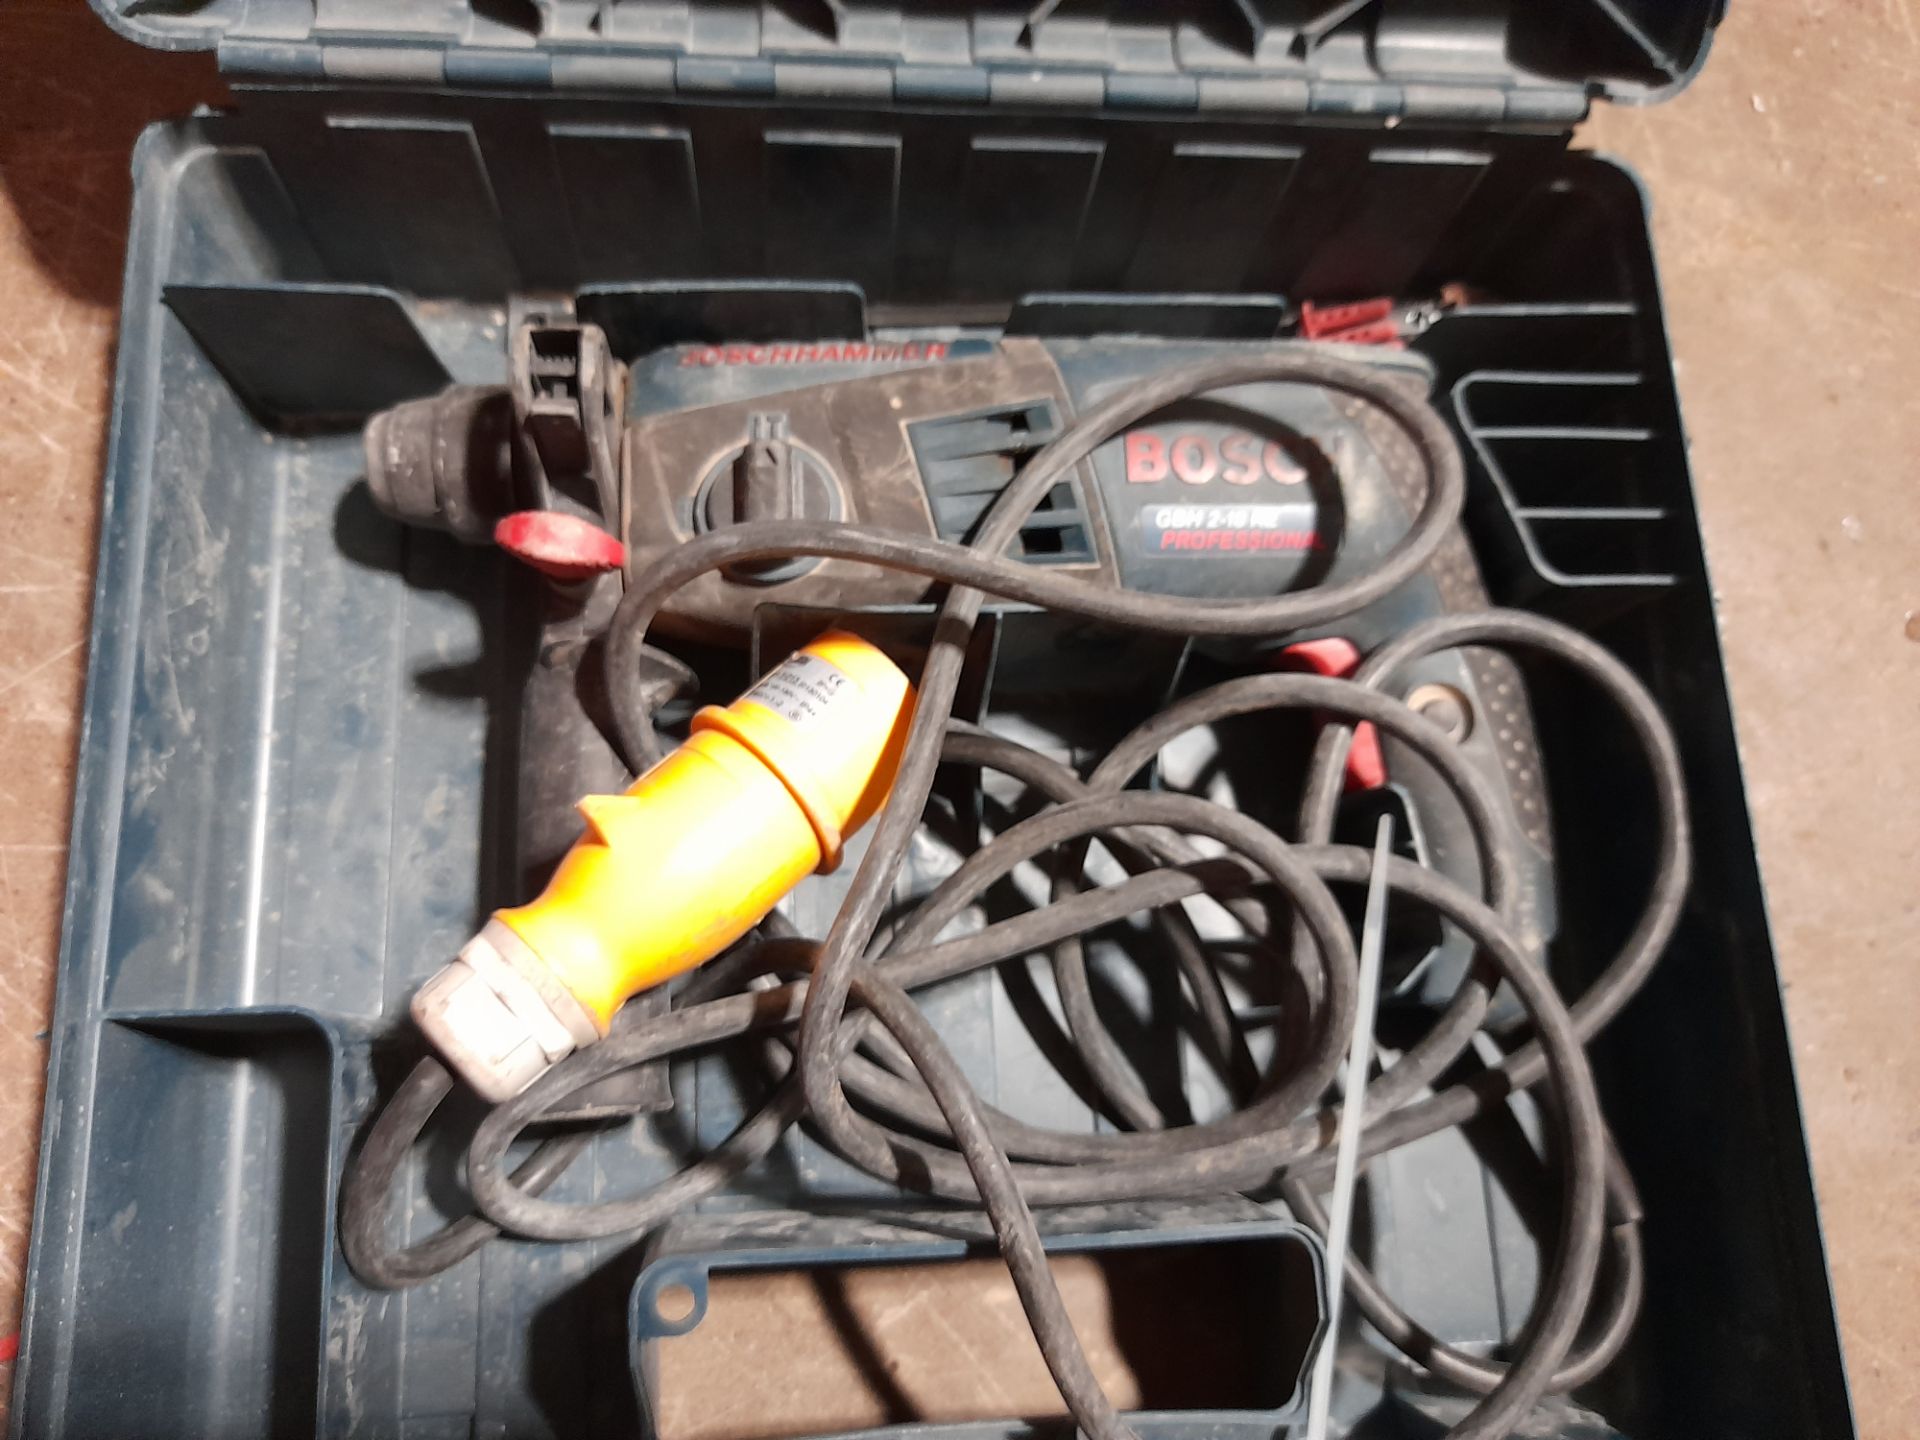 Bosch GBH 2-18RE professional drill, with case - Image 3 of 3